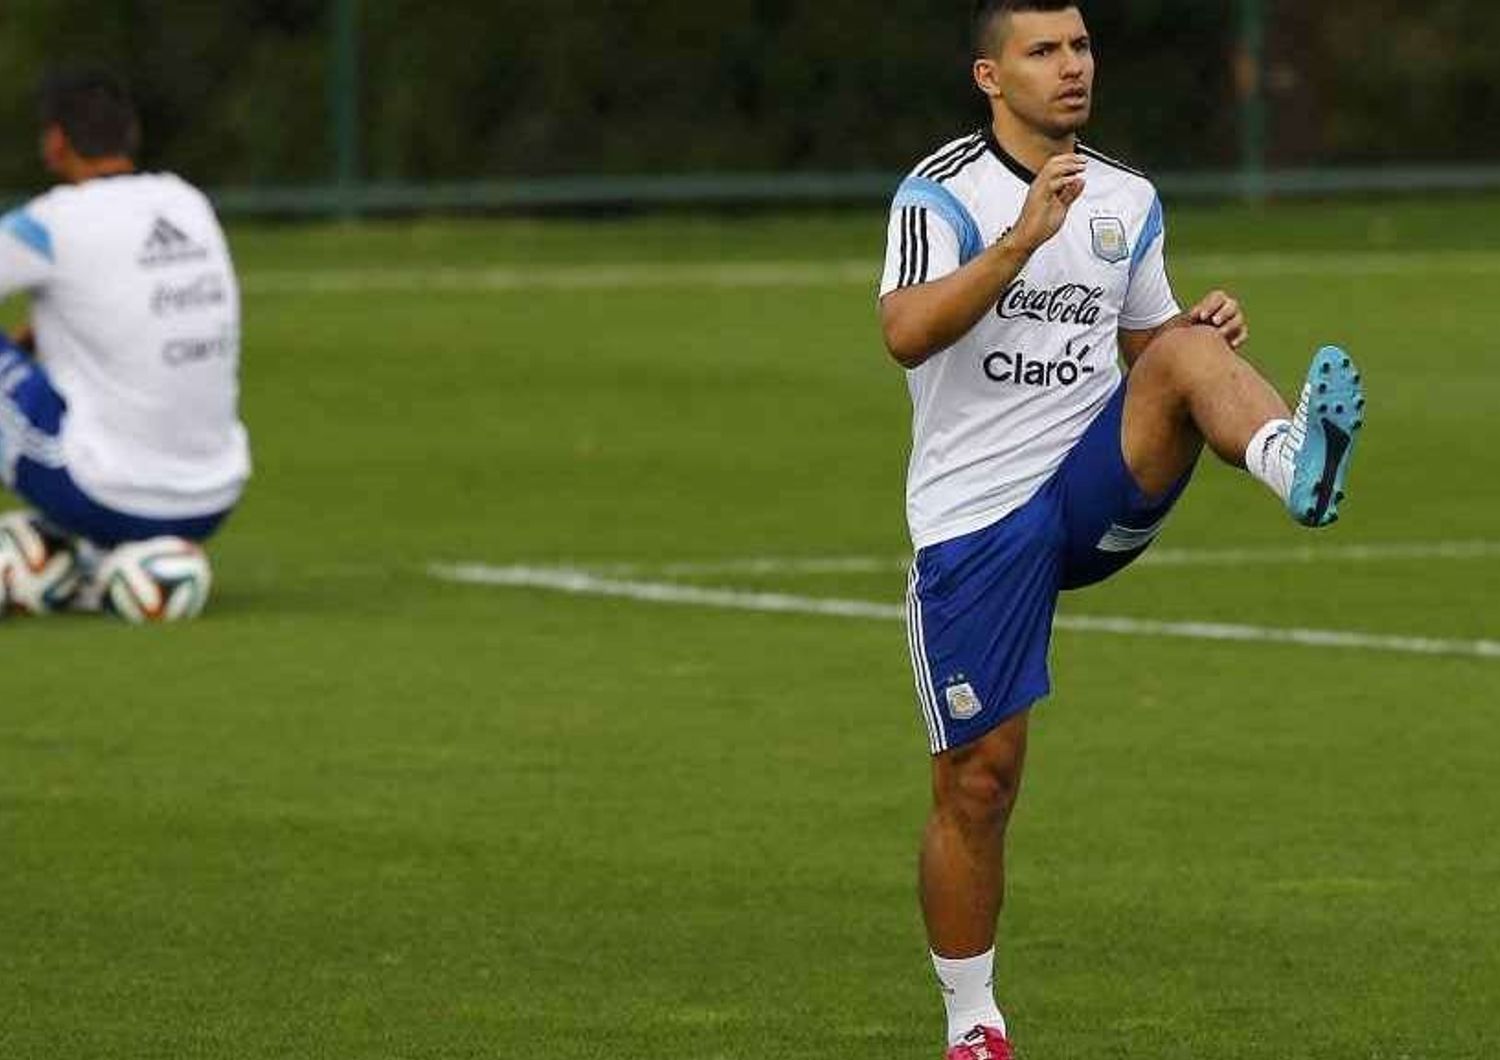 Football: Aguero likely to be ready to face Belgium